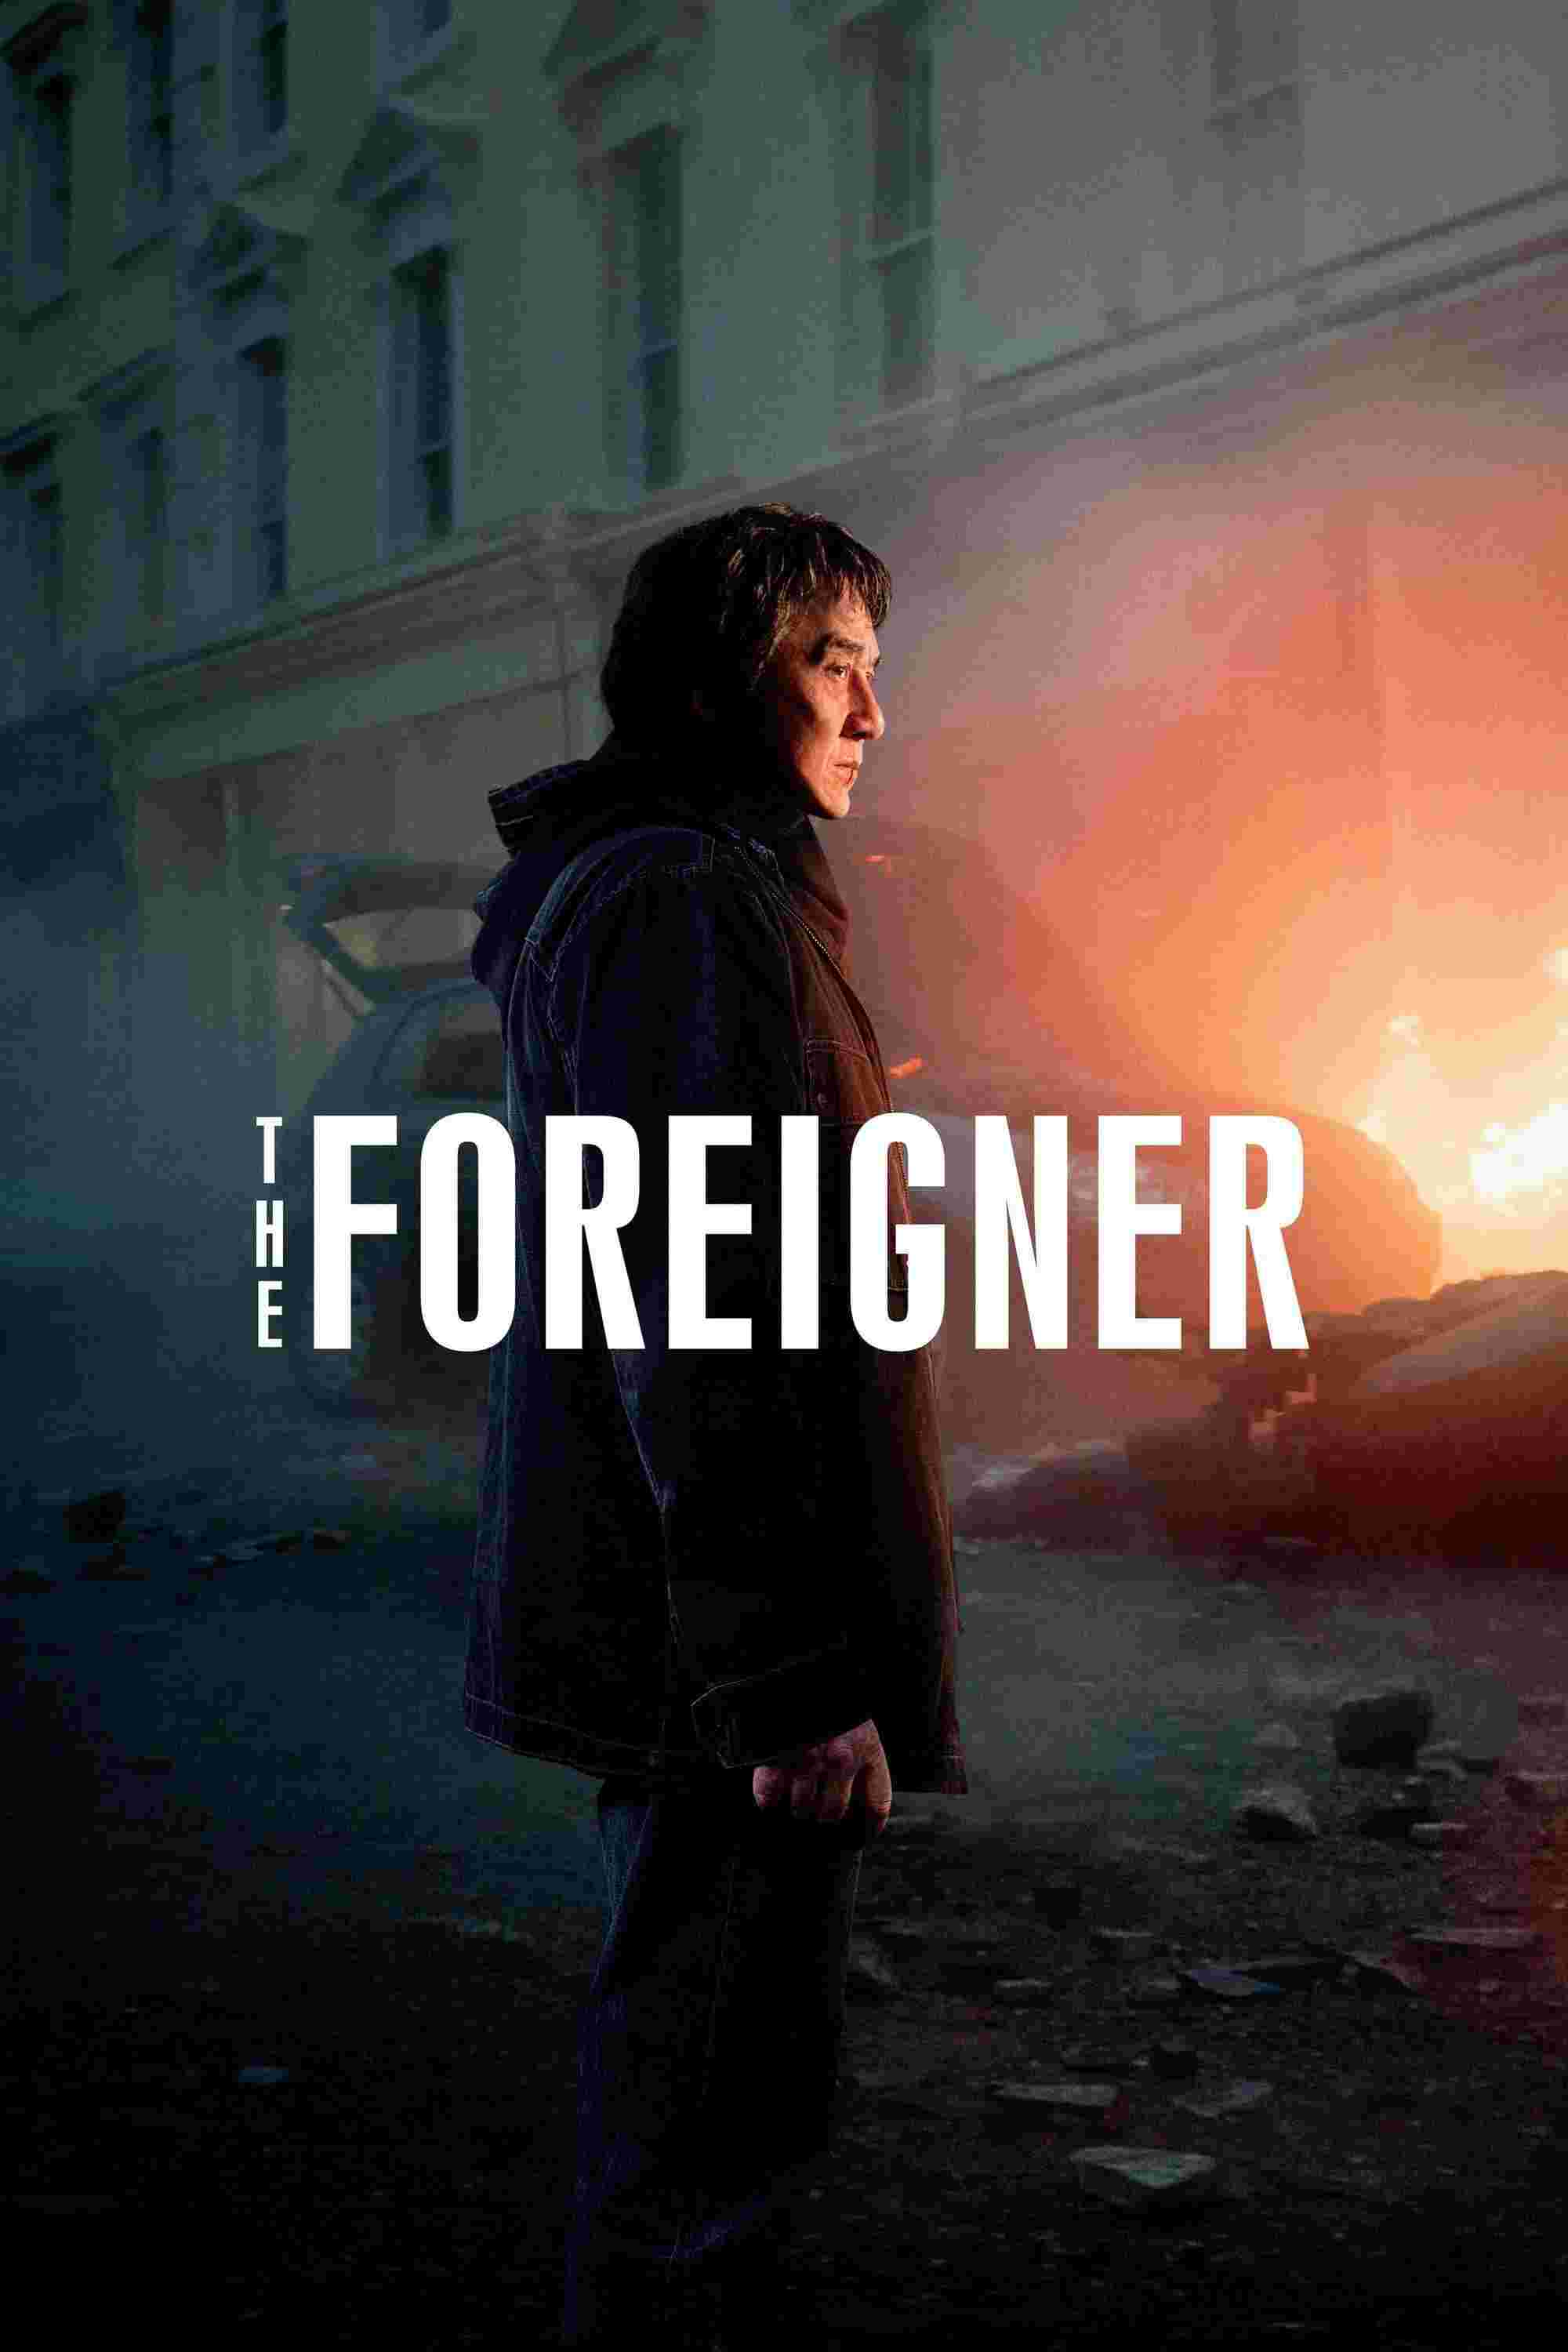 The Foreigner (2017) Katie Leung